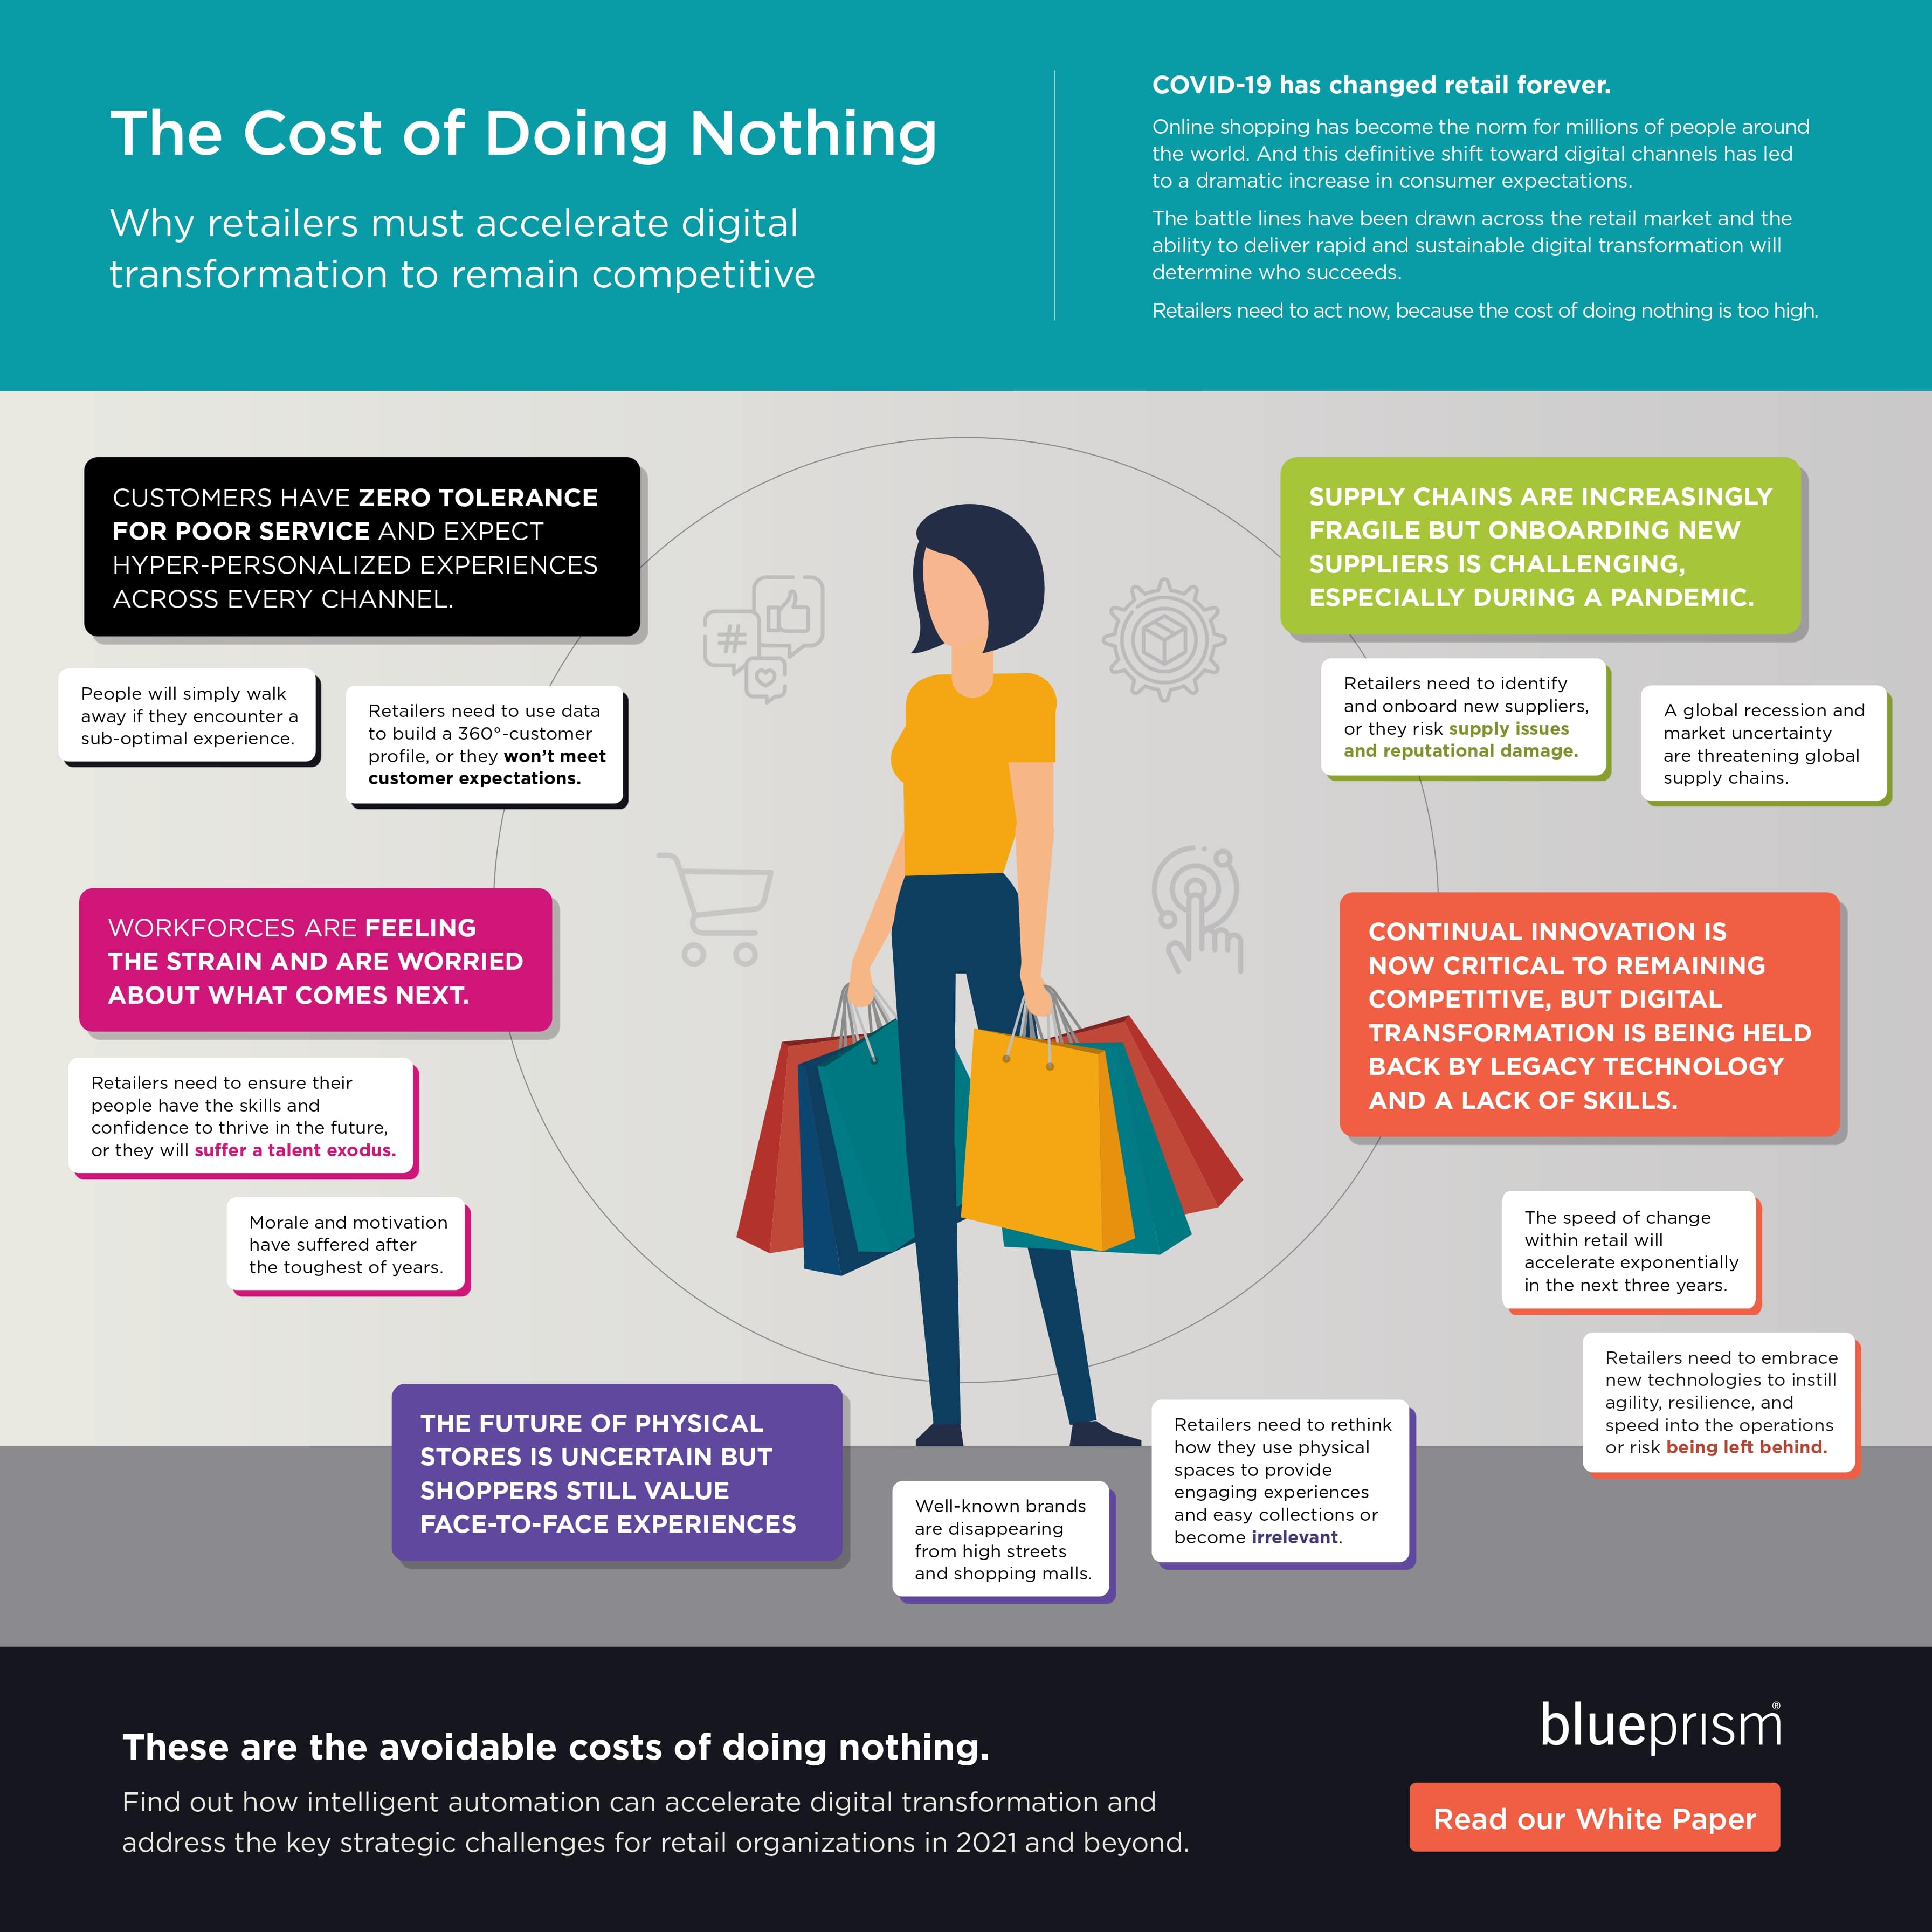 The cost of doing nothing - Why Retailers must accelerate digital transformation to stay competitive Infographic